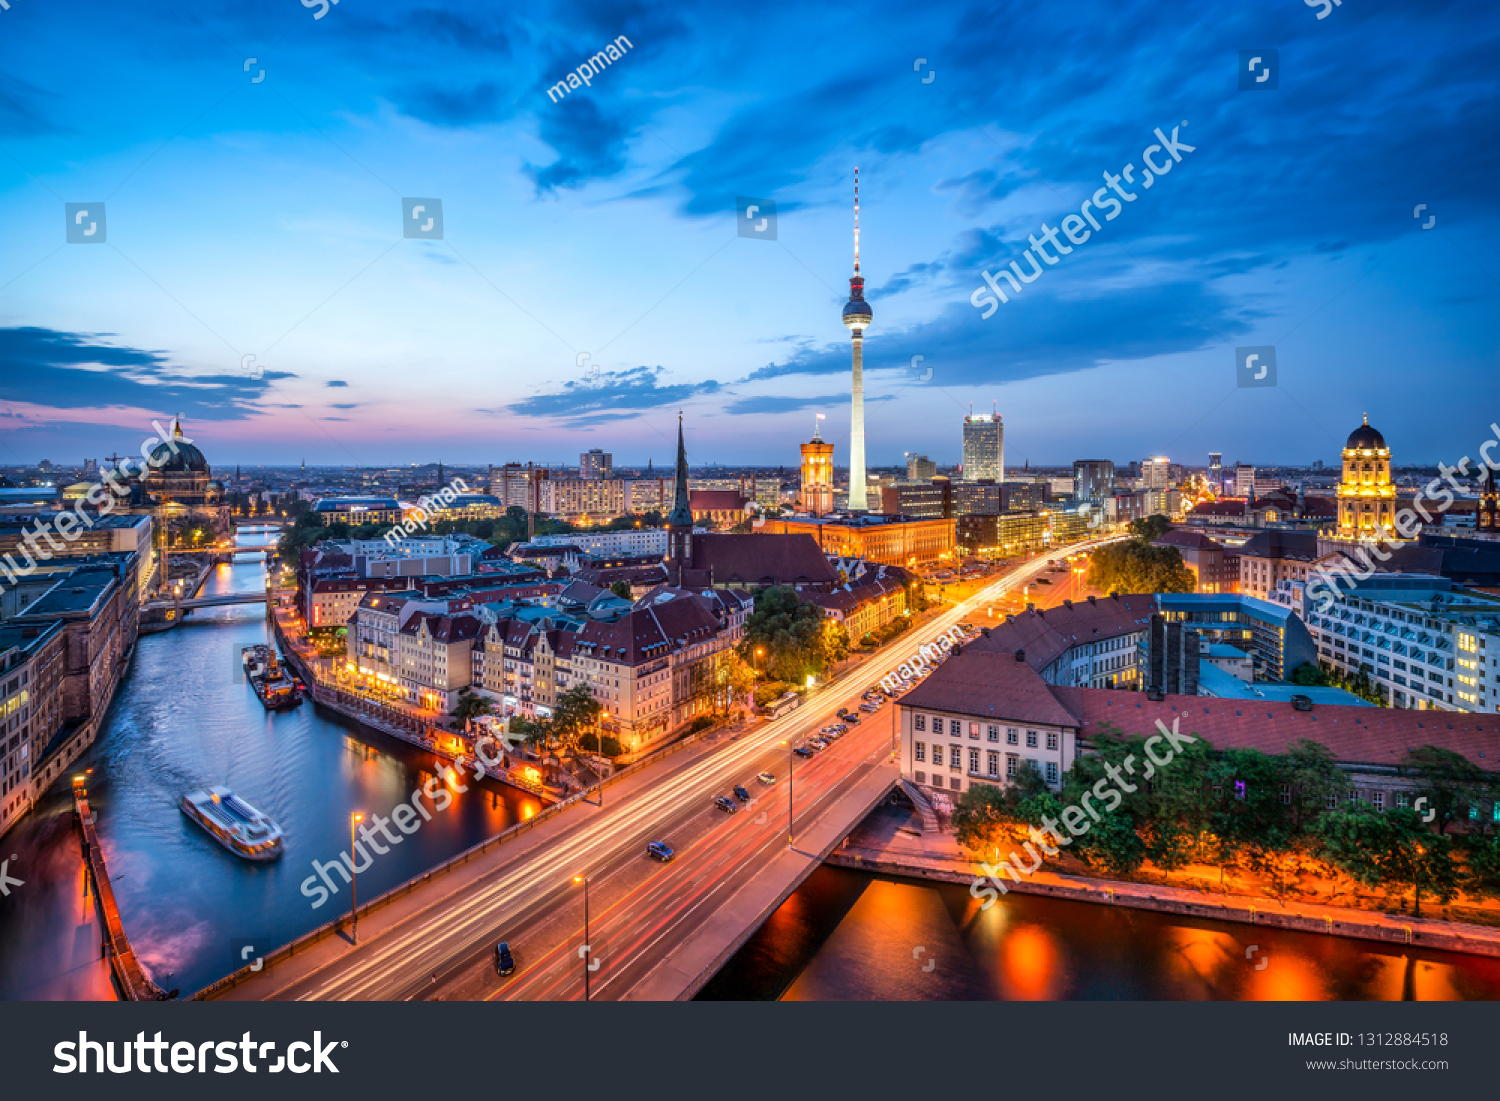 Berlin skyline at dusk with television tower, Germany #1312884518